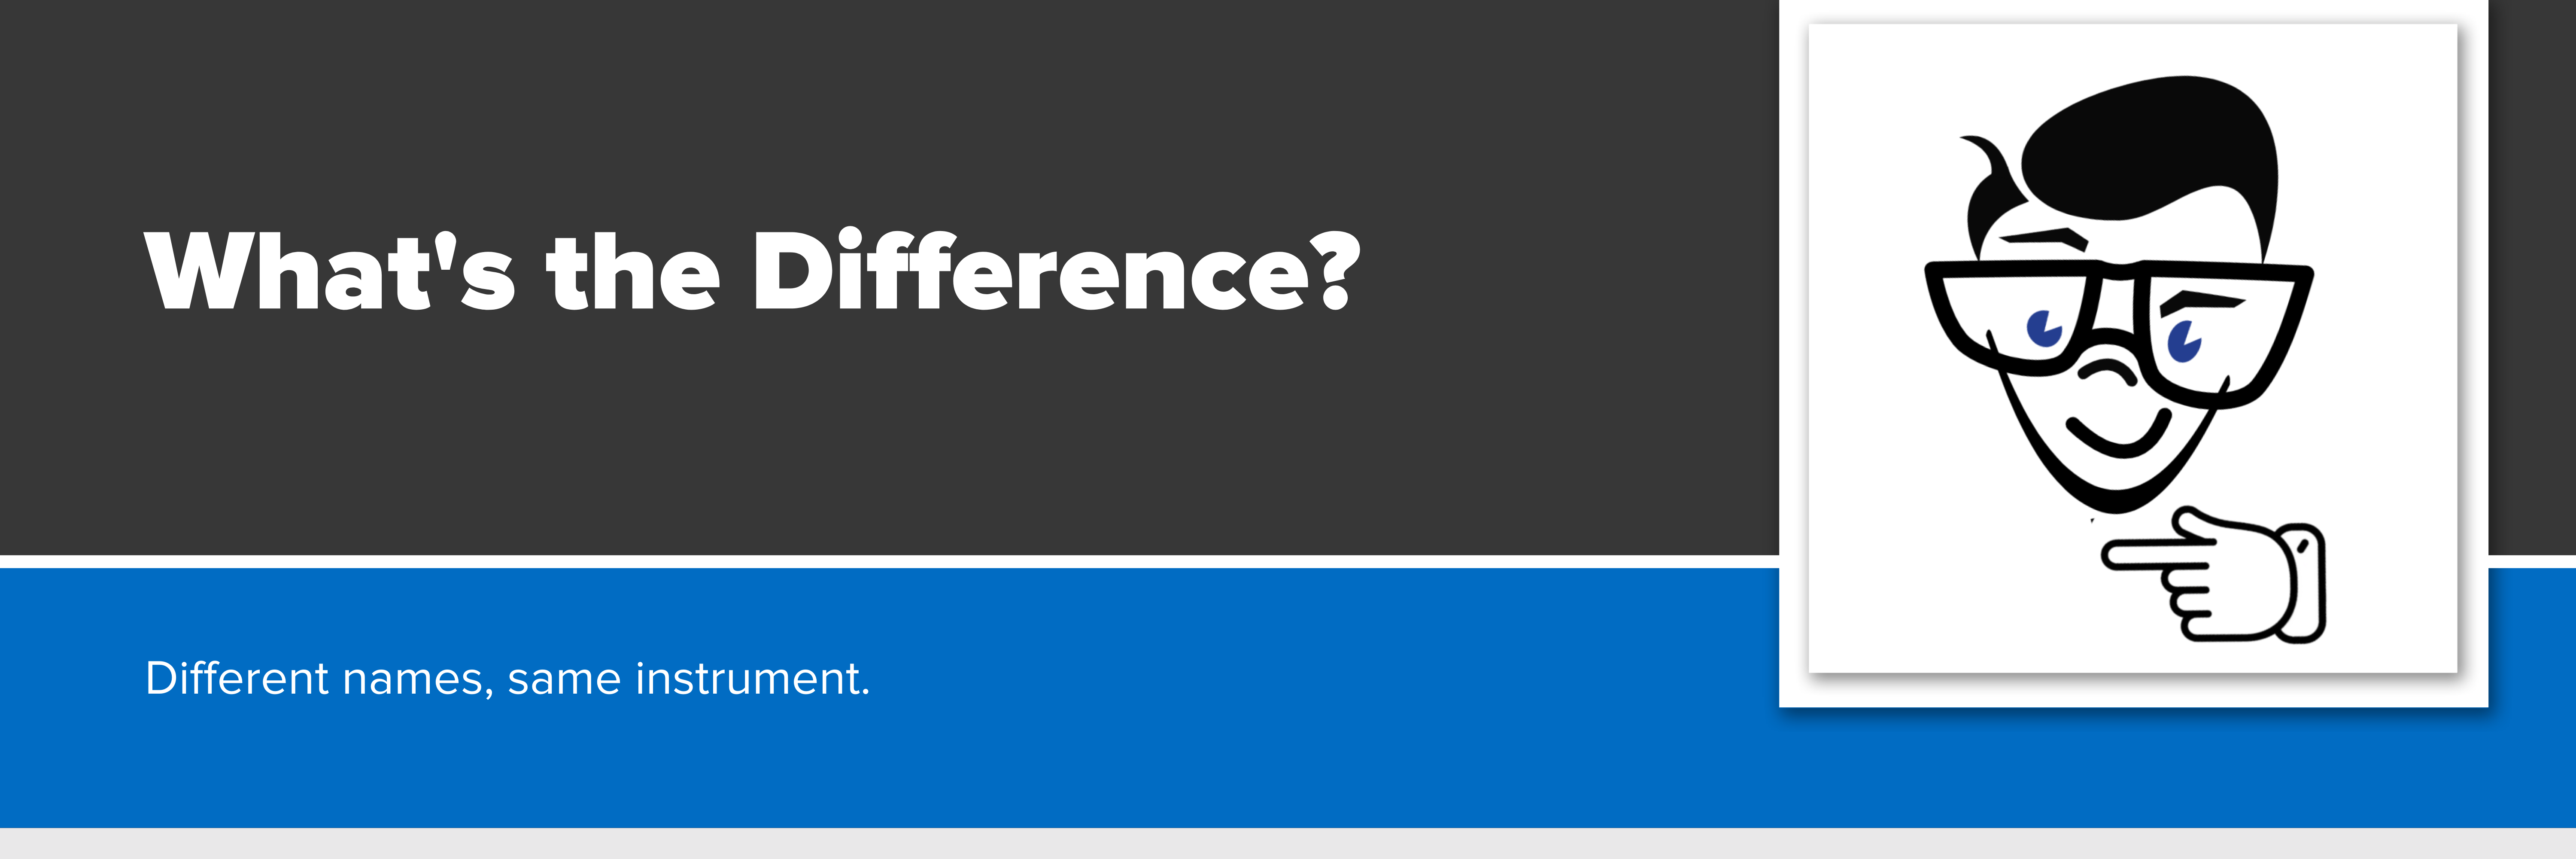 Header image with text "what's the difference?"